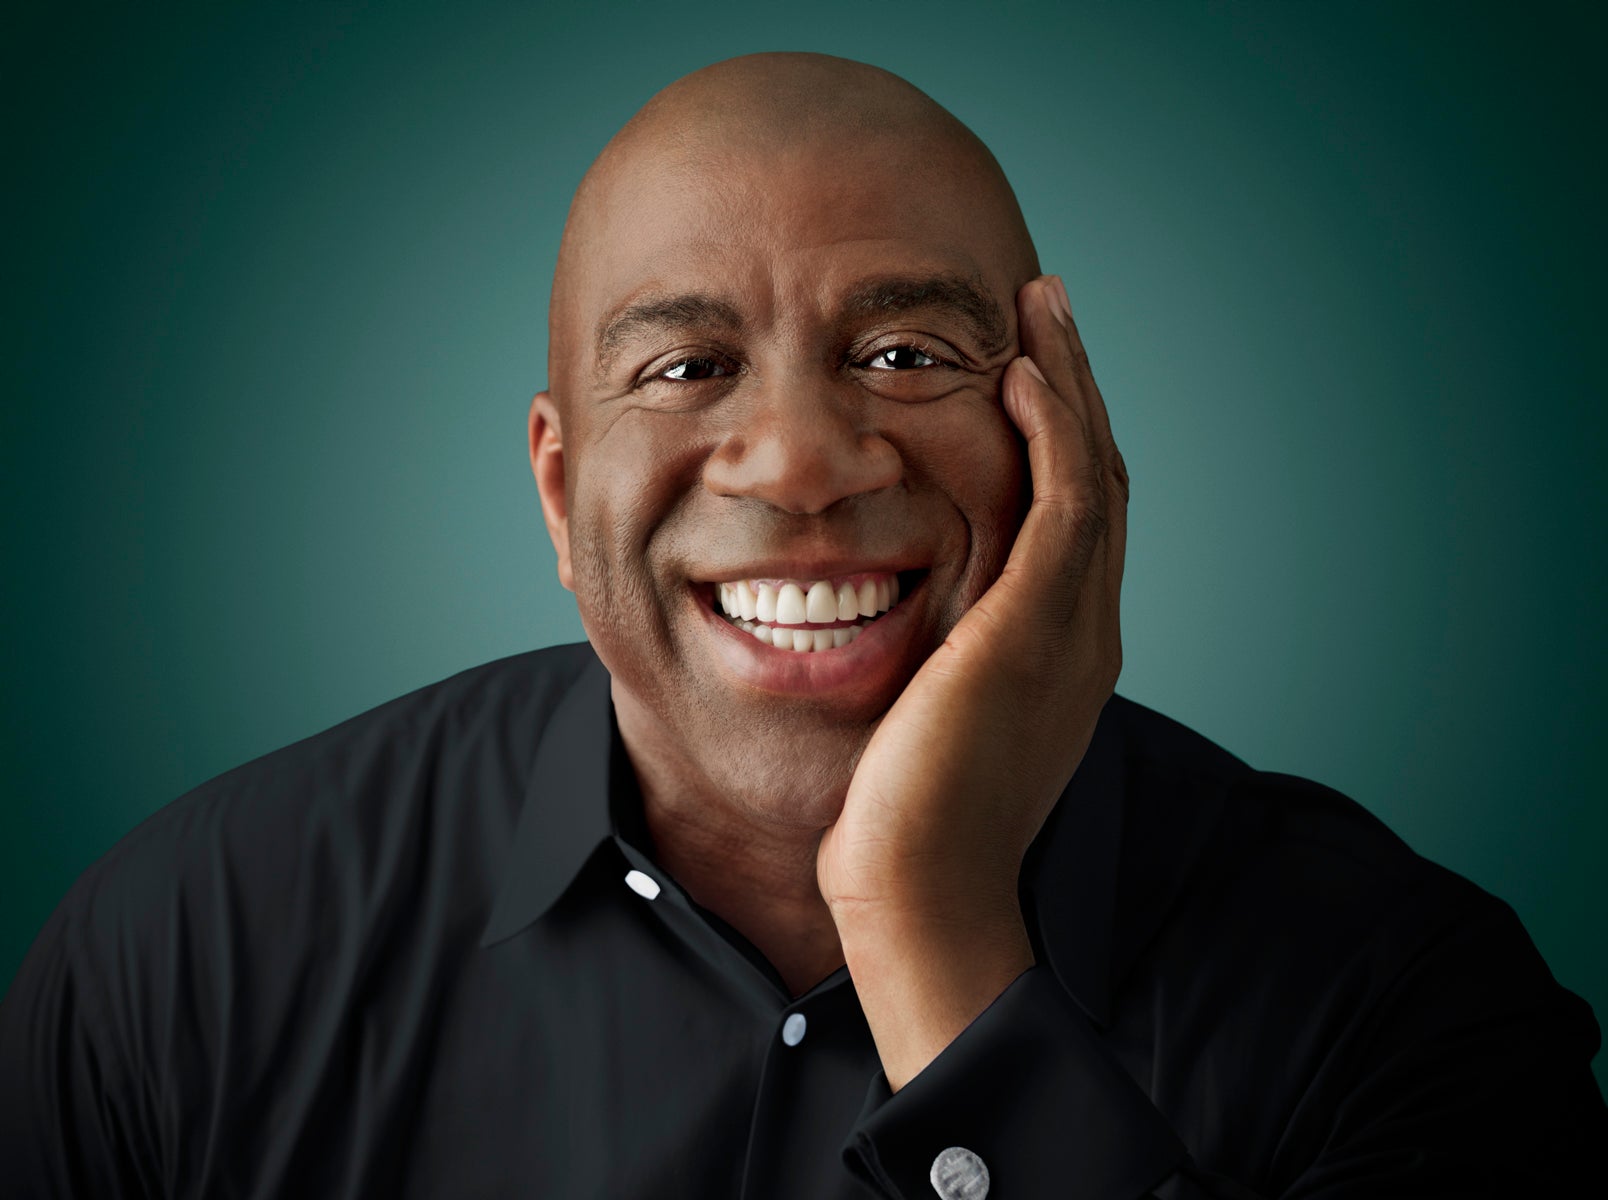 Magic Johnson Partners With The City Of Chicago For Wealth-Building Conference: "Financial Education Is Key"